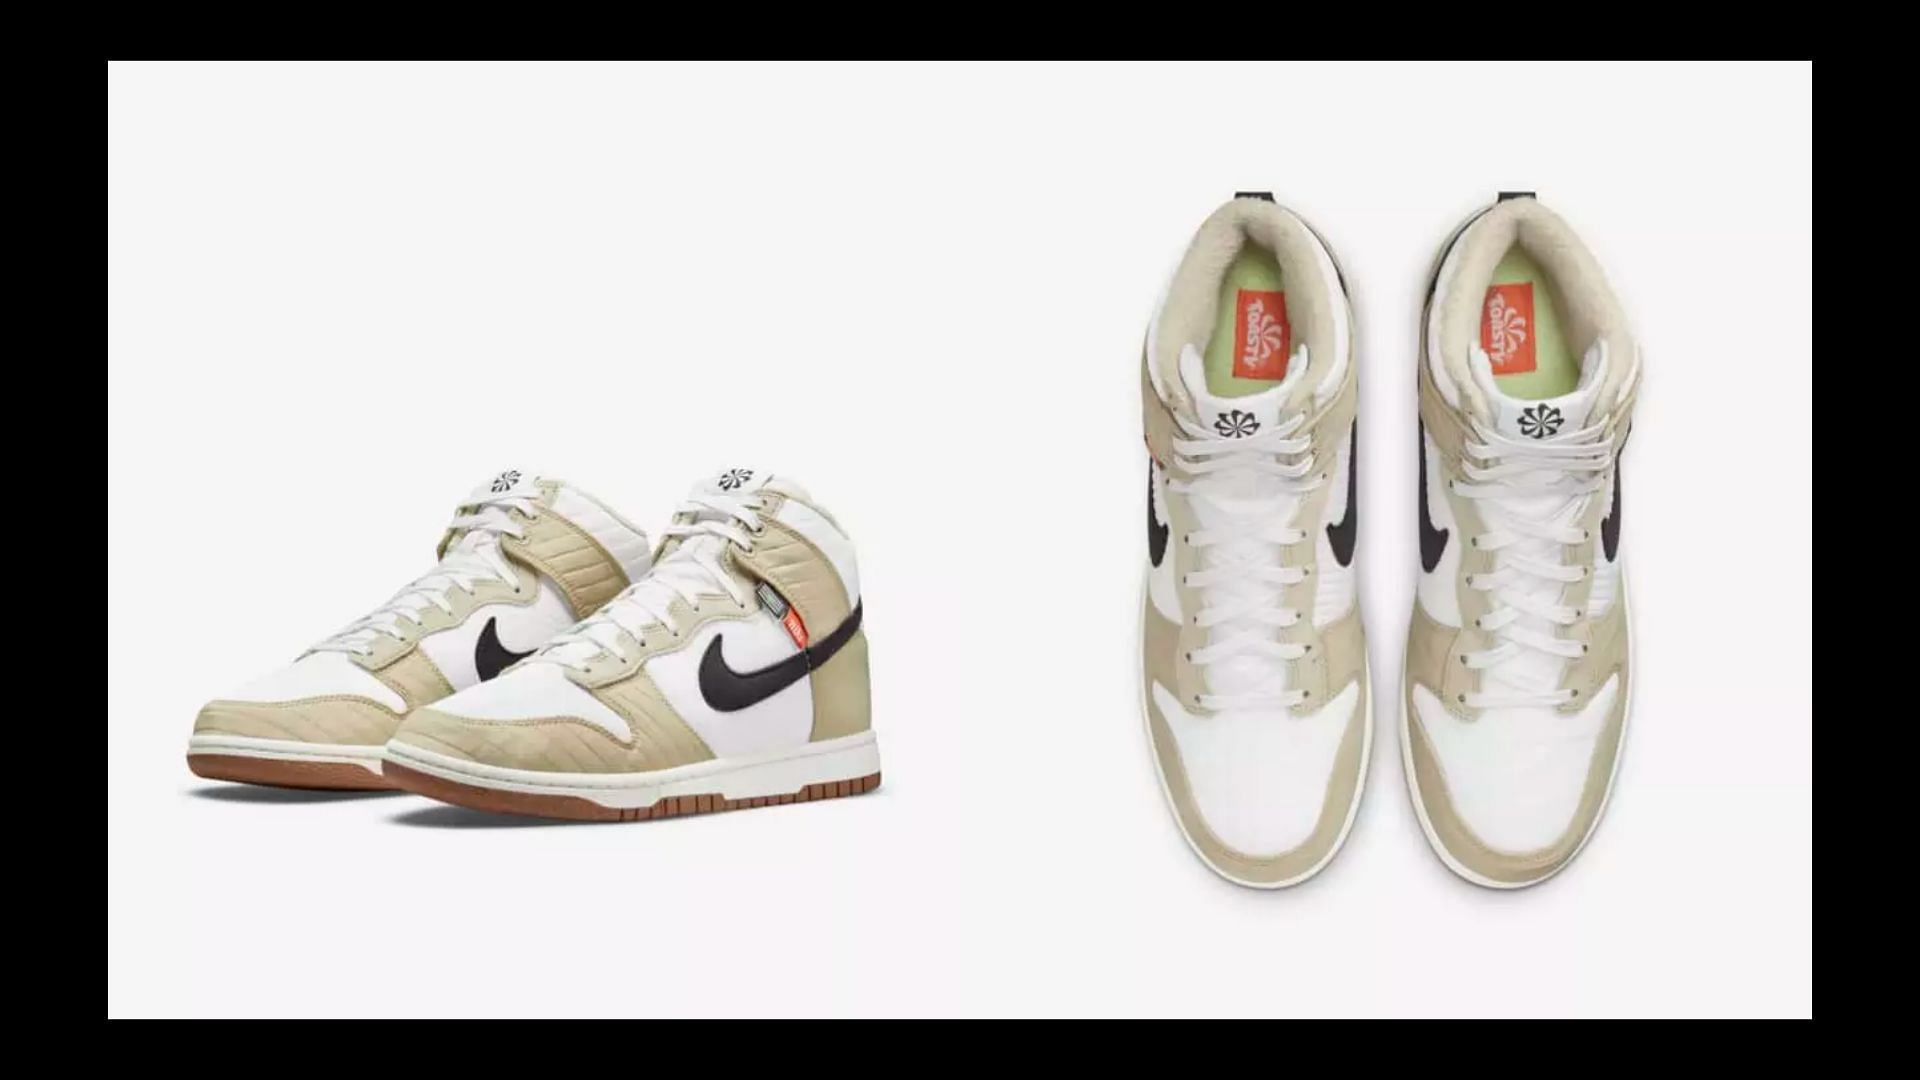 5 upcoming Nike upcoming dunks Dunk releases in July 2022